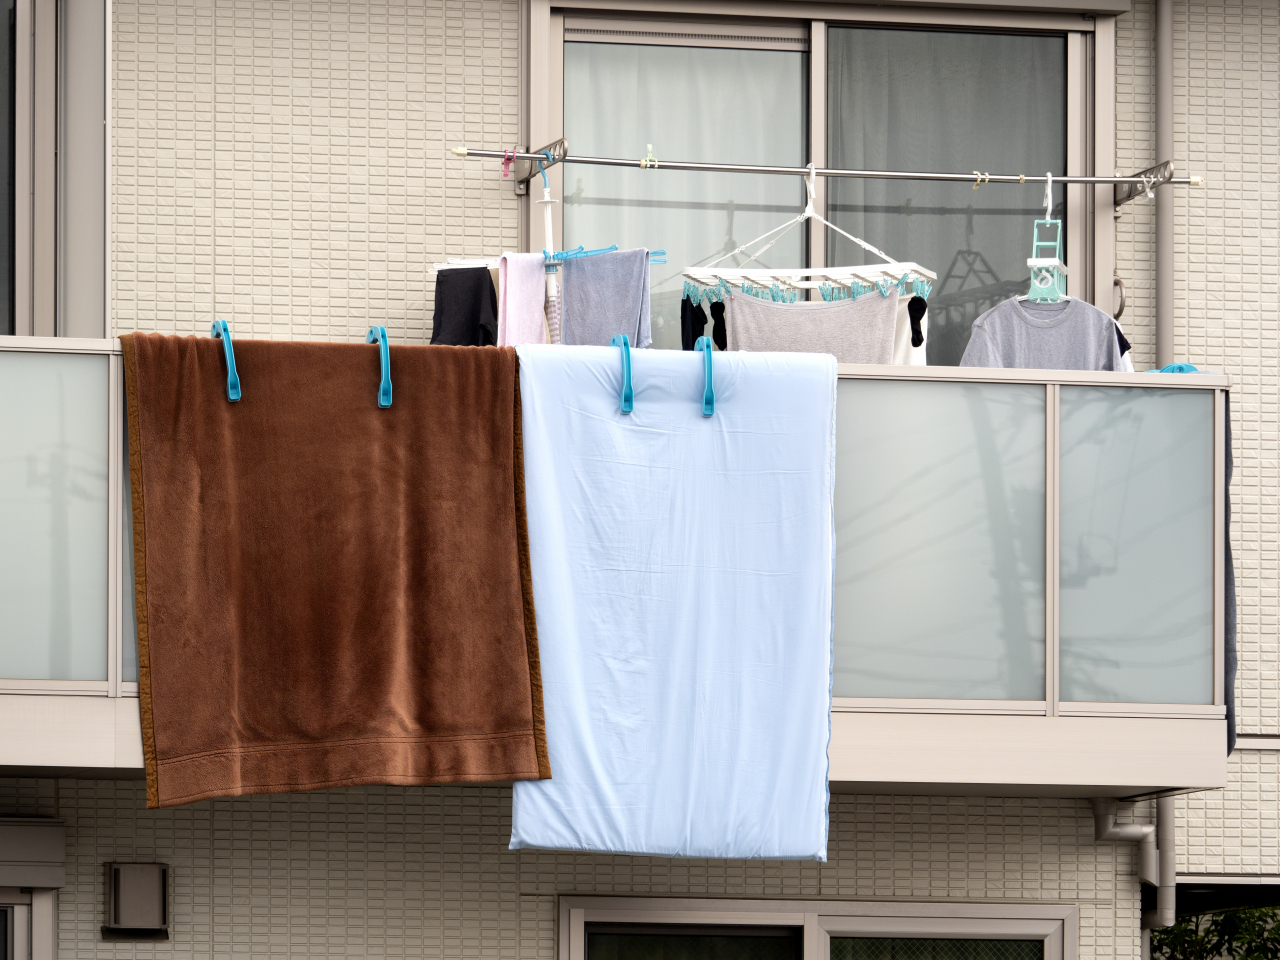 A blanket and comforter hang over the balcony of an apartment unit. (Getty Images)